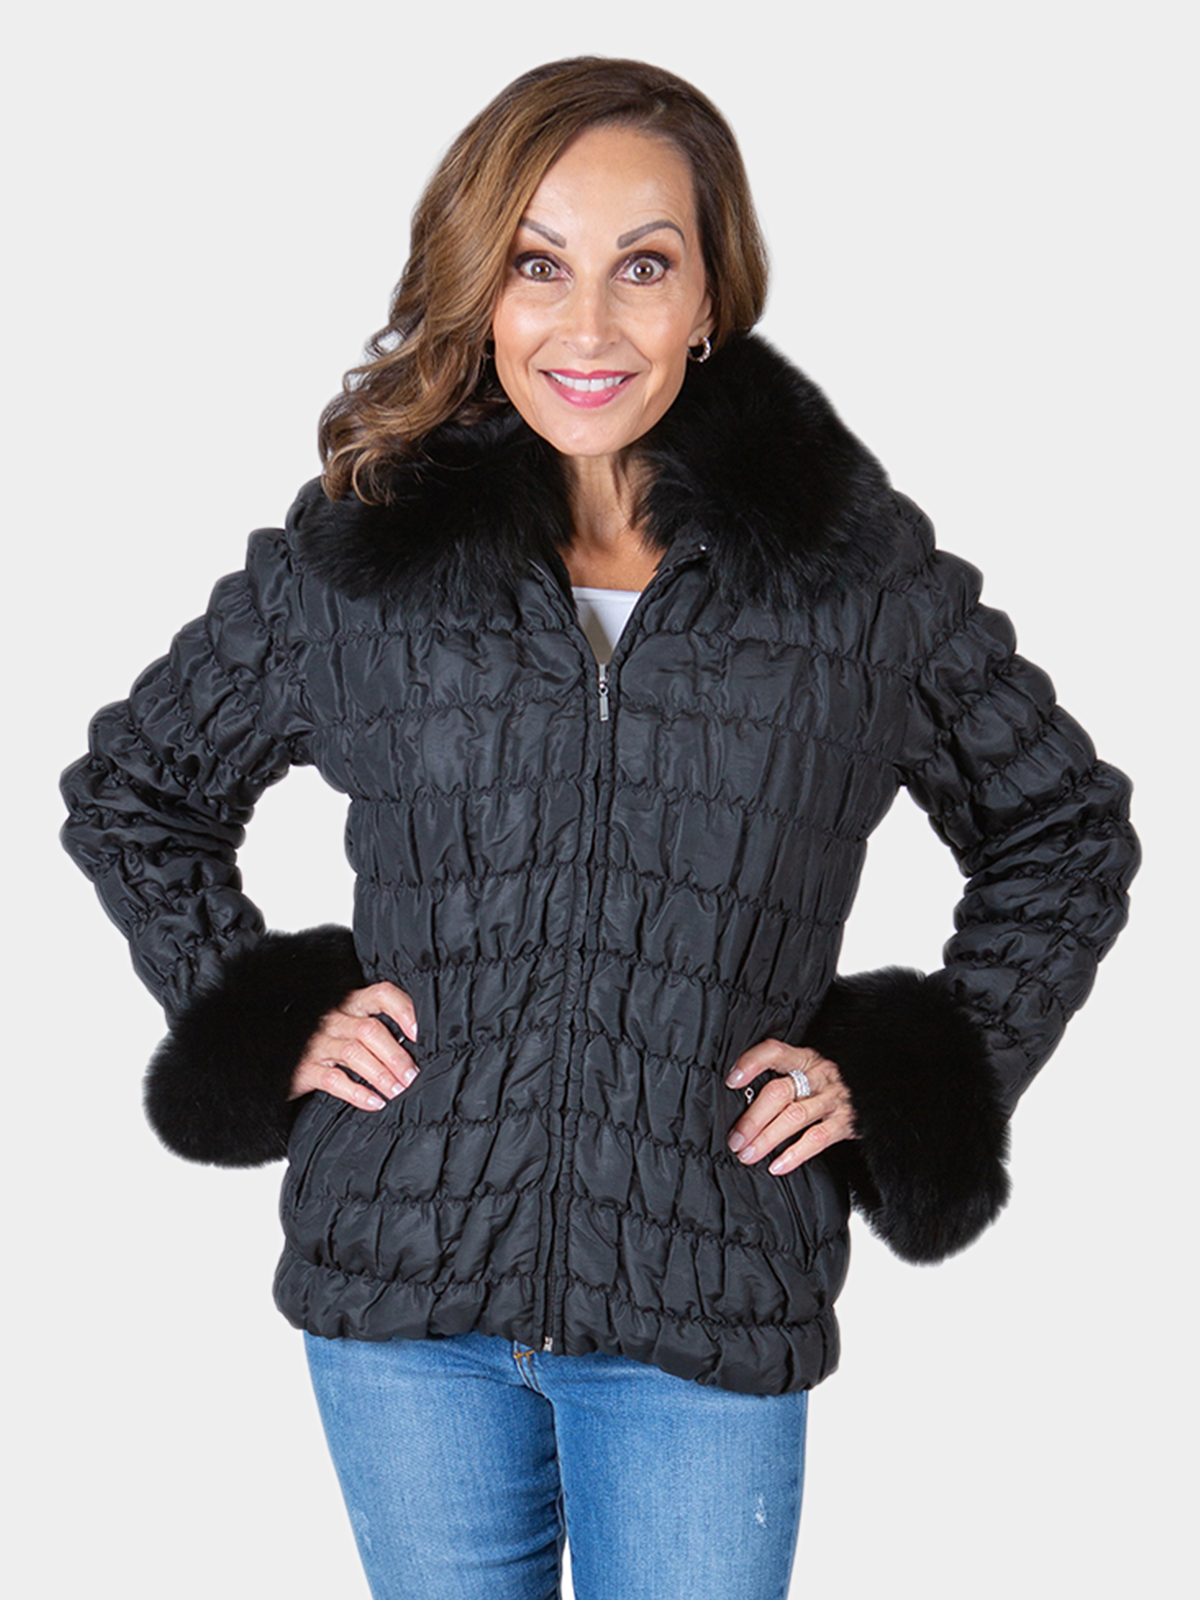 Woman's Black Fabric Jacket with Fox Fur Collar and Cuffs / Fur Lining